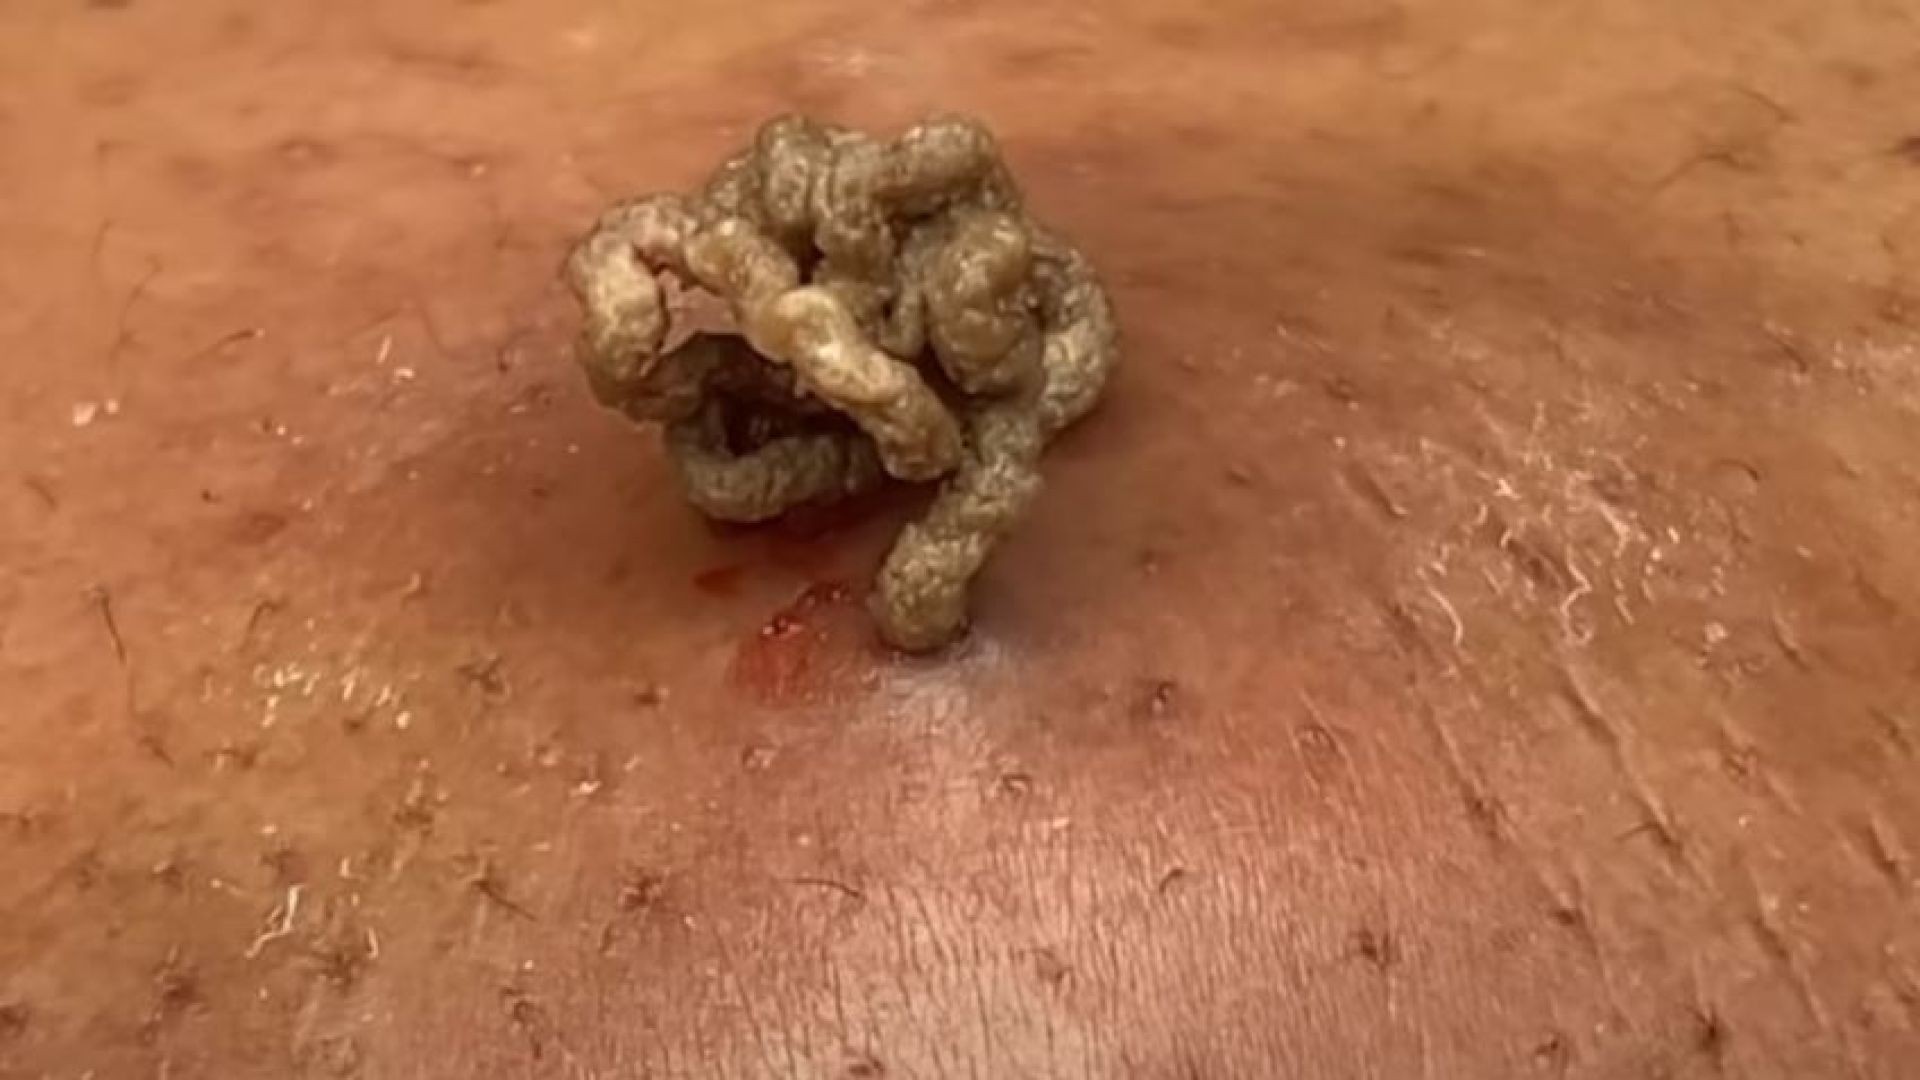 Stop right here for the worst sebaceous cyst ever recorded